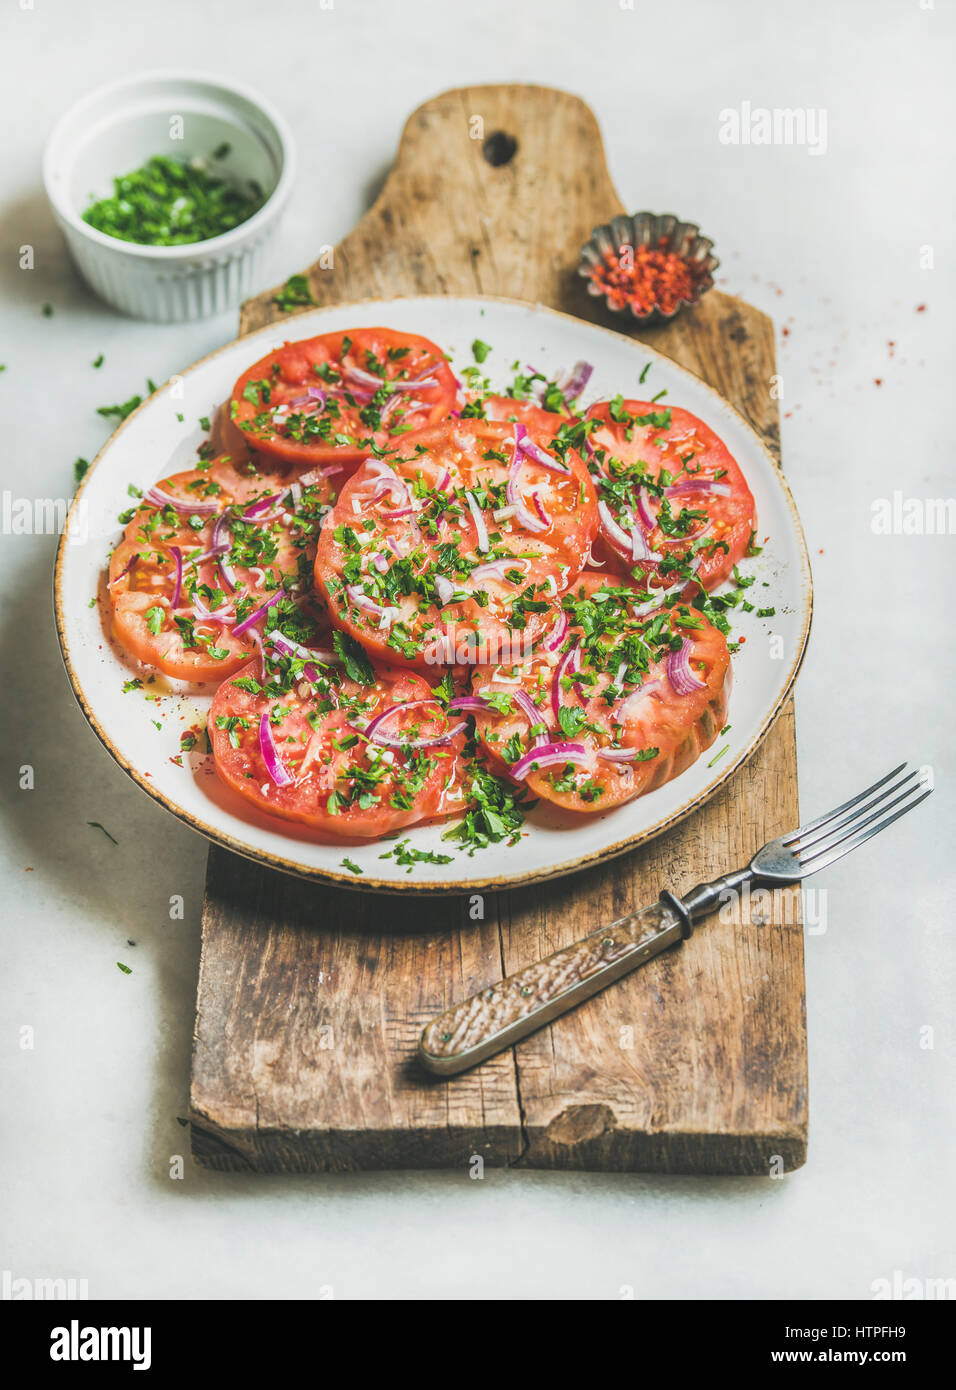 Fresh heirloom tomato, parsley and onion salad in white plate on rustic wooden board over light grey marble background, selective focus. Clean eating, Stock Photo